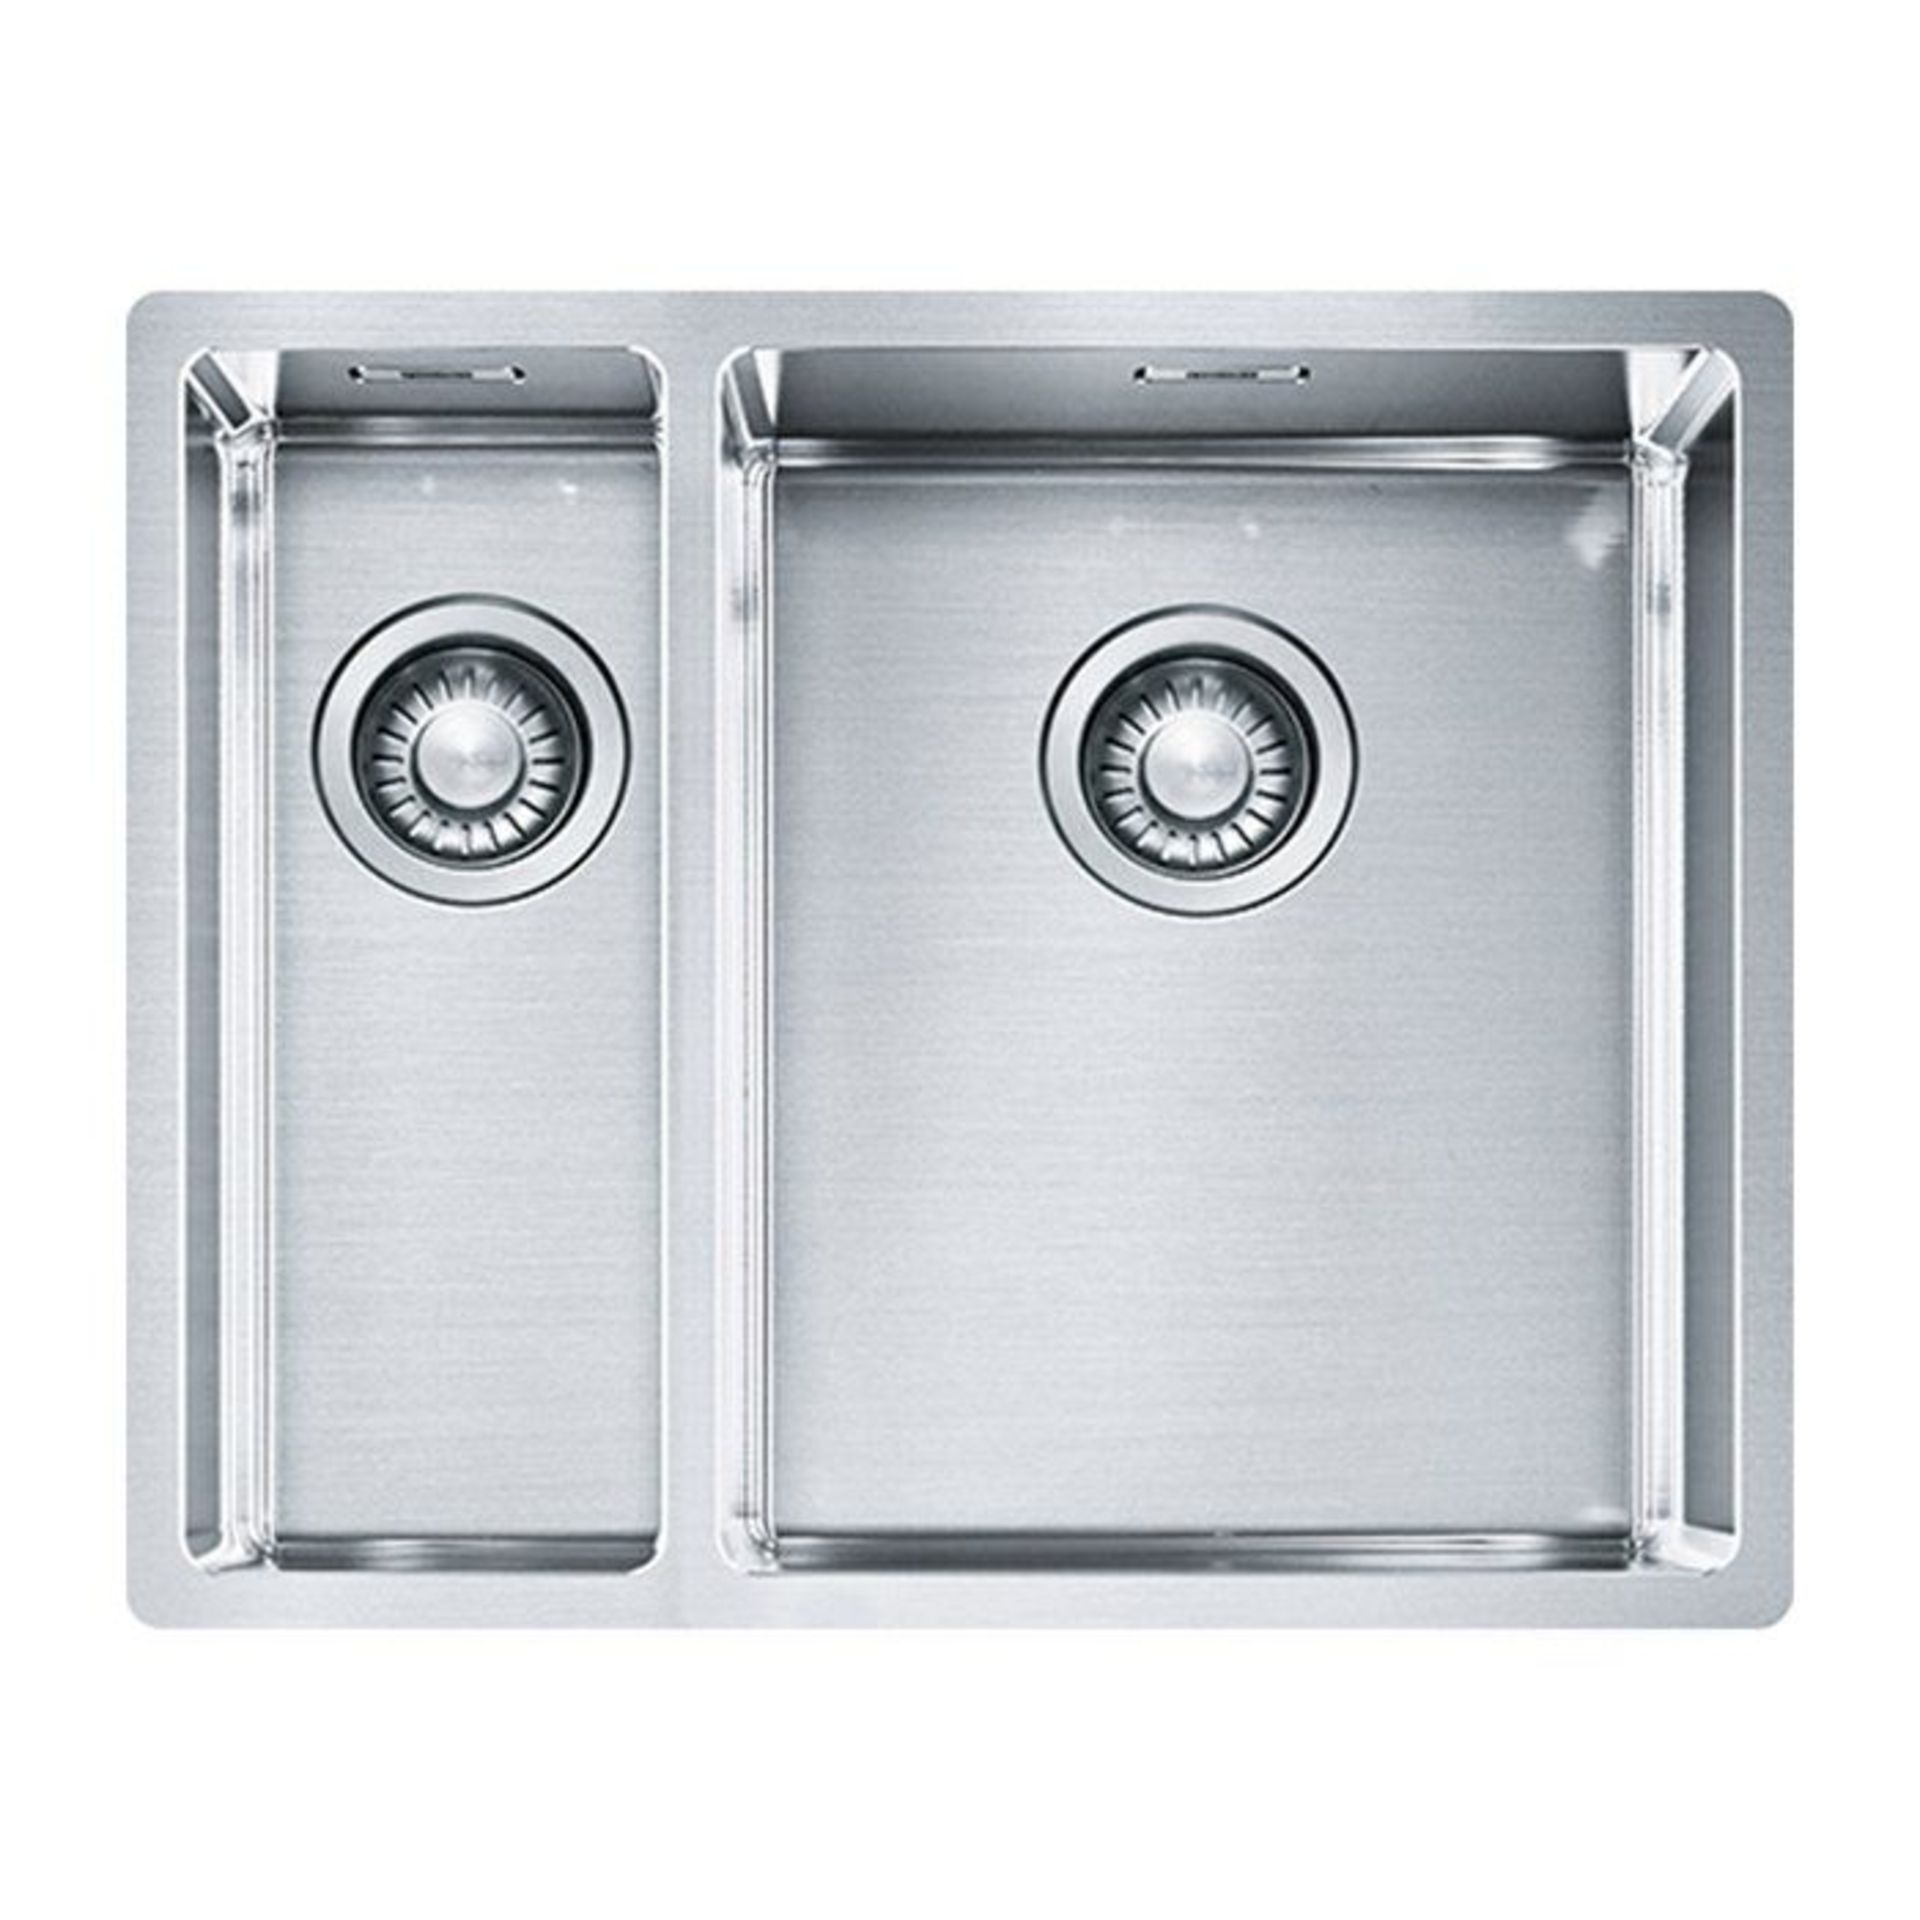 NEW BOXED LAMONA BY FRANKE Stainless Steel Inset/Undermount Sink 1.5 Bowl. SNK5835 (ROW14). RRP £